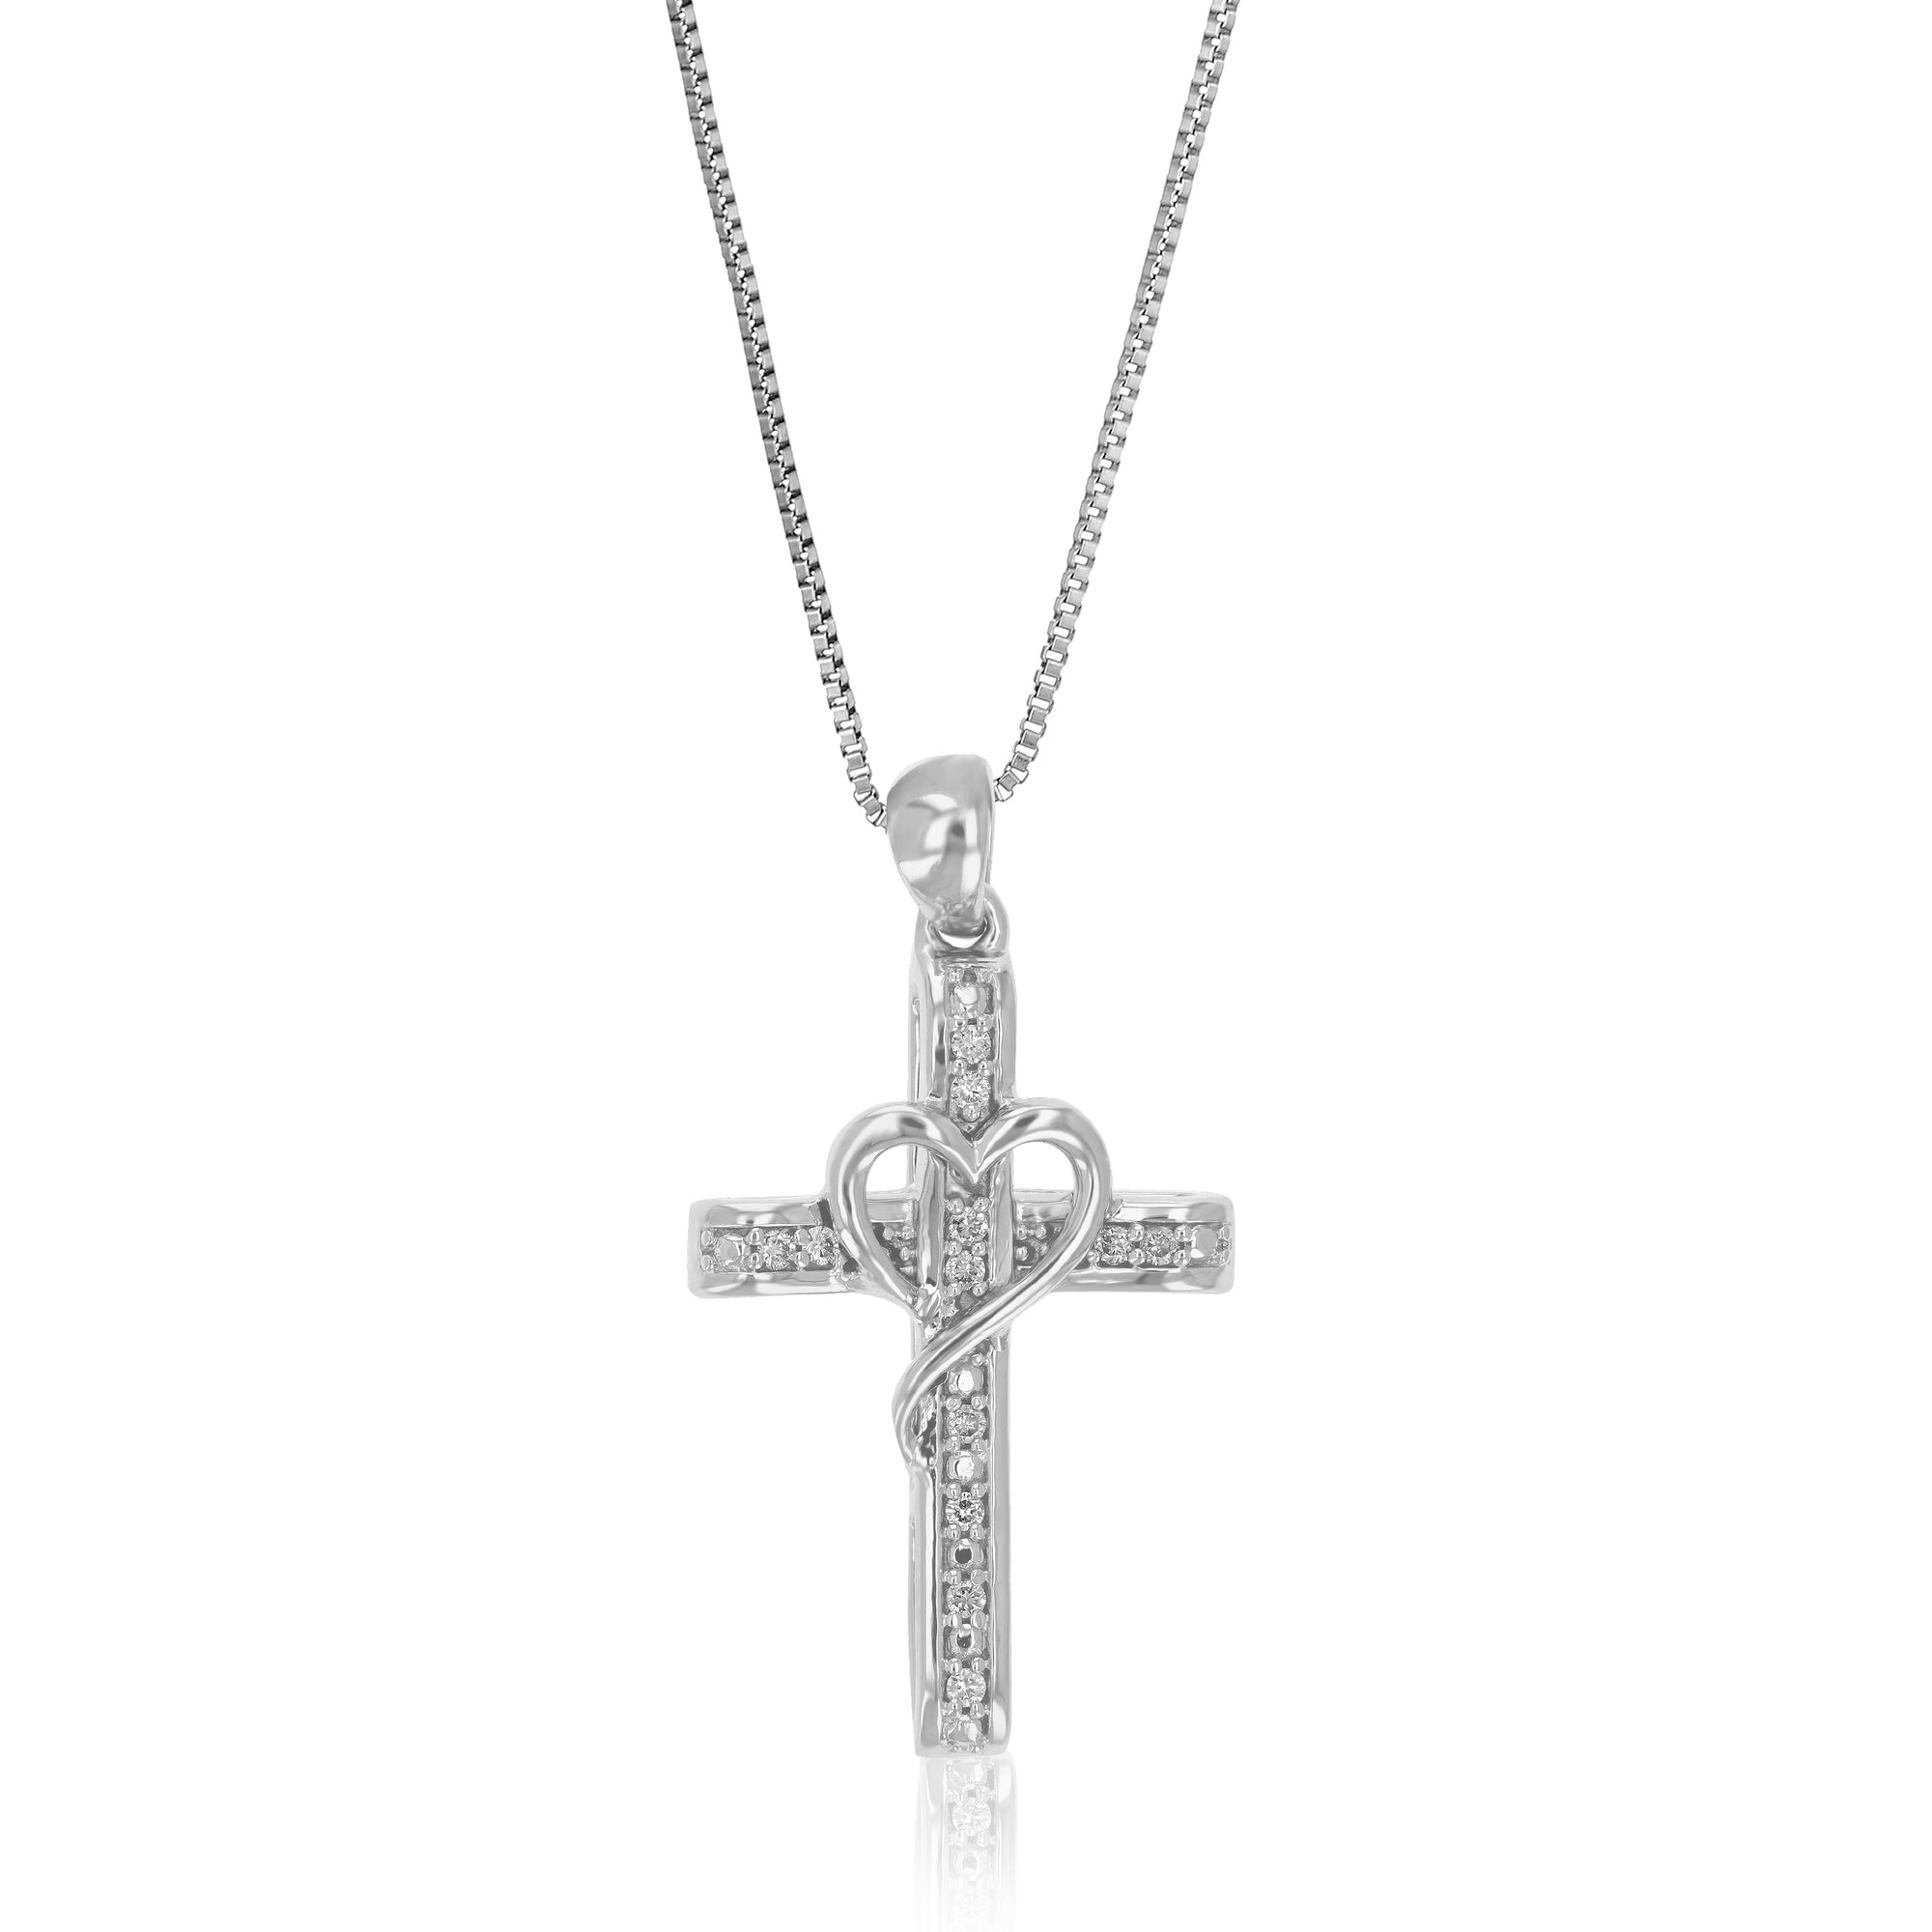 1/10 cttw Diamond Pendant Necklace for Women, Lab Grown Diamond Cross and Heart Pendant Necklace in .925 Sterling Silver with Chain, Size 1 1/4 Inch